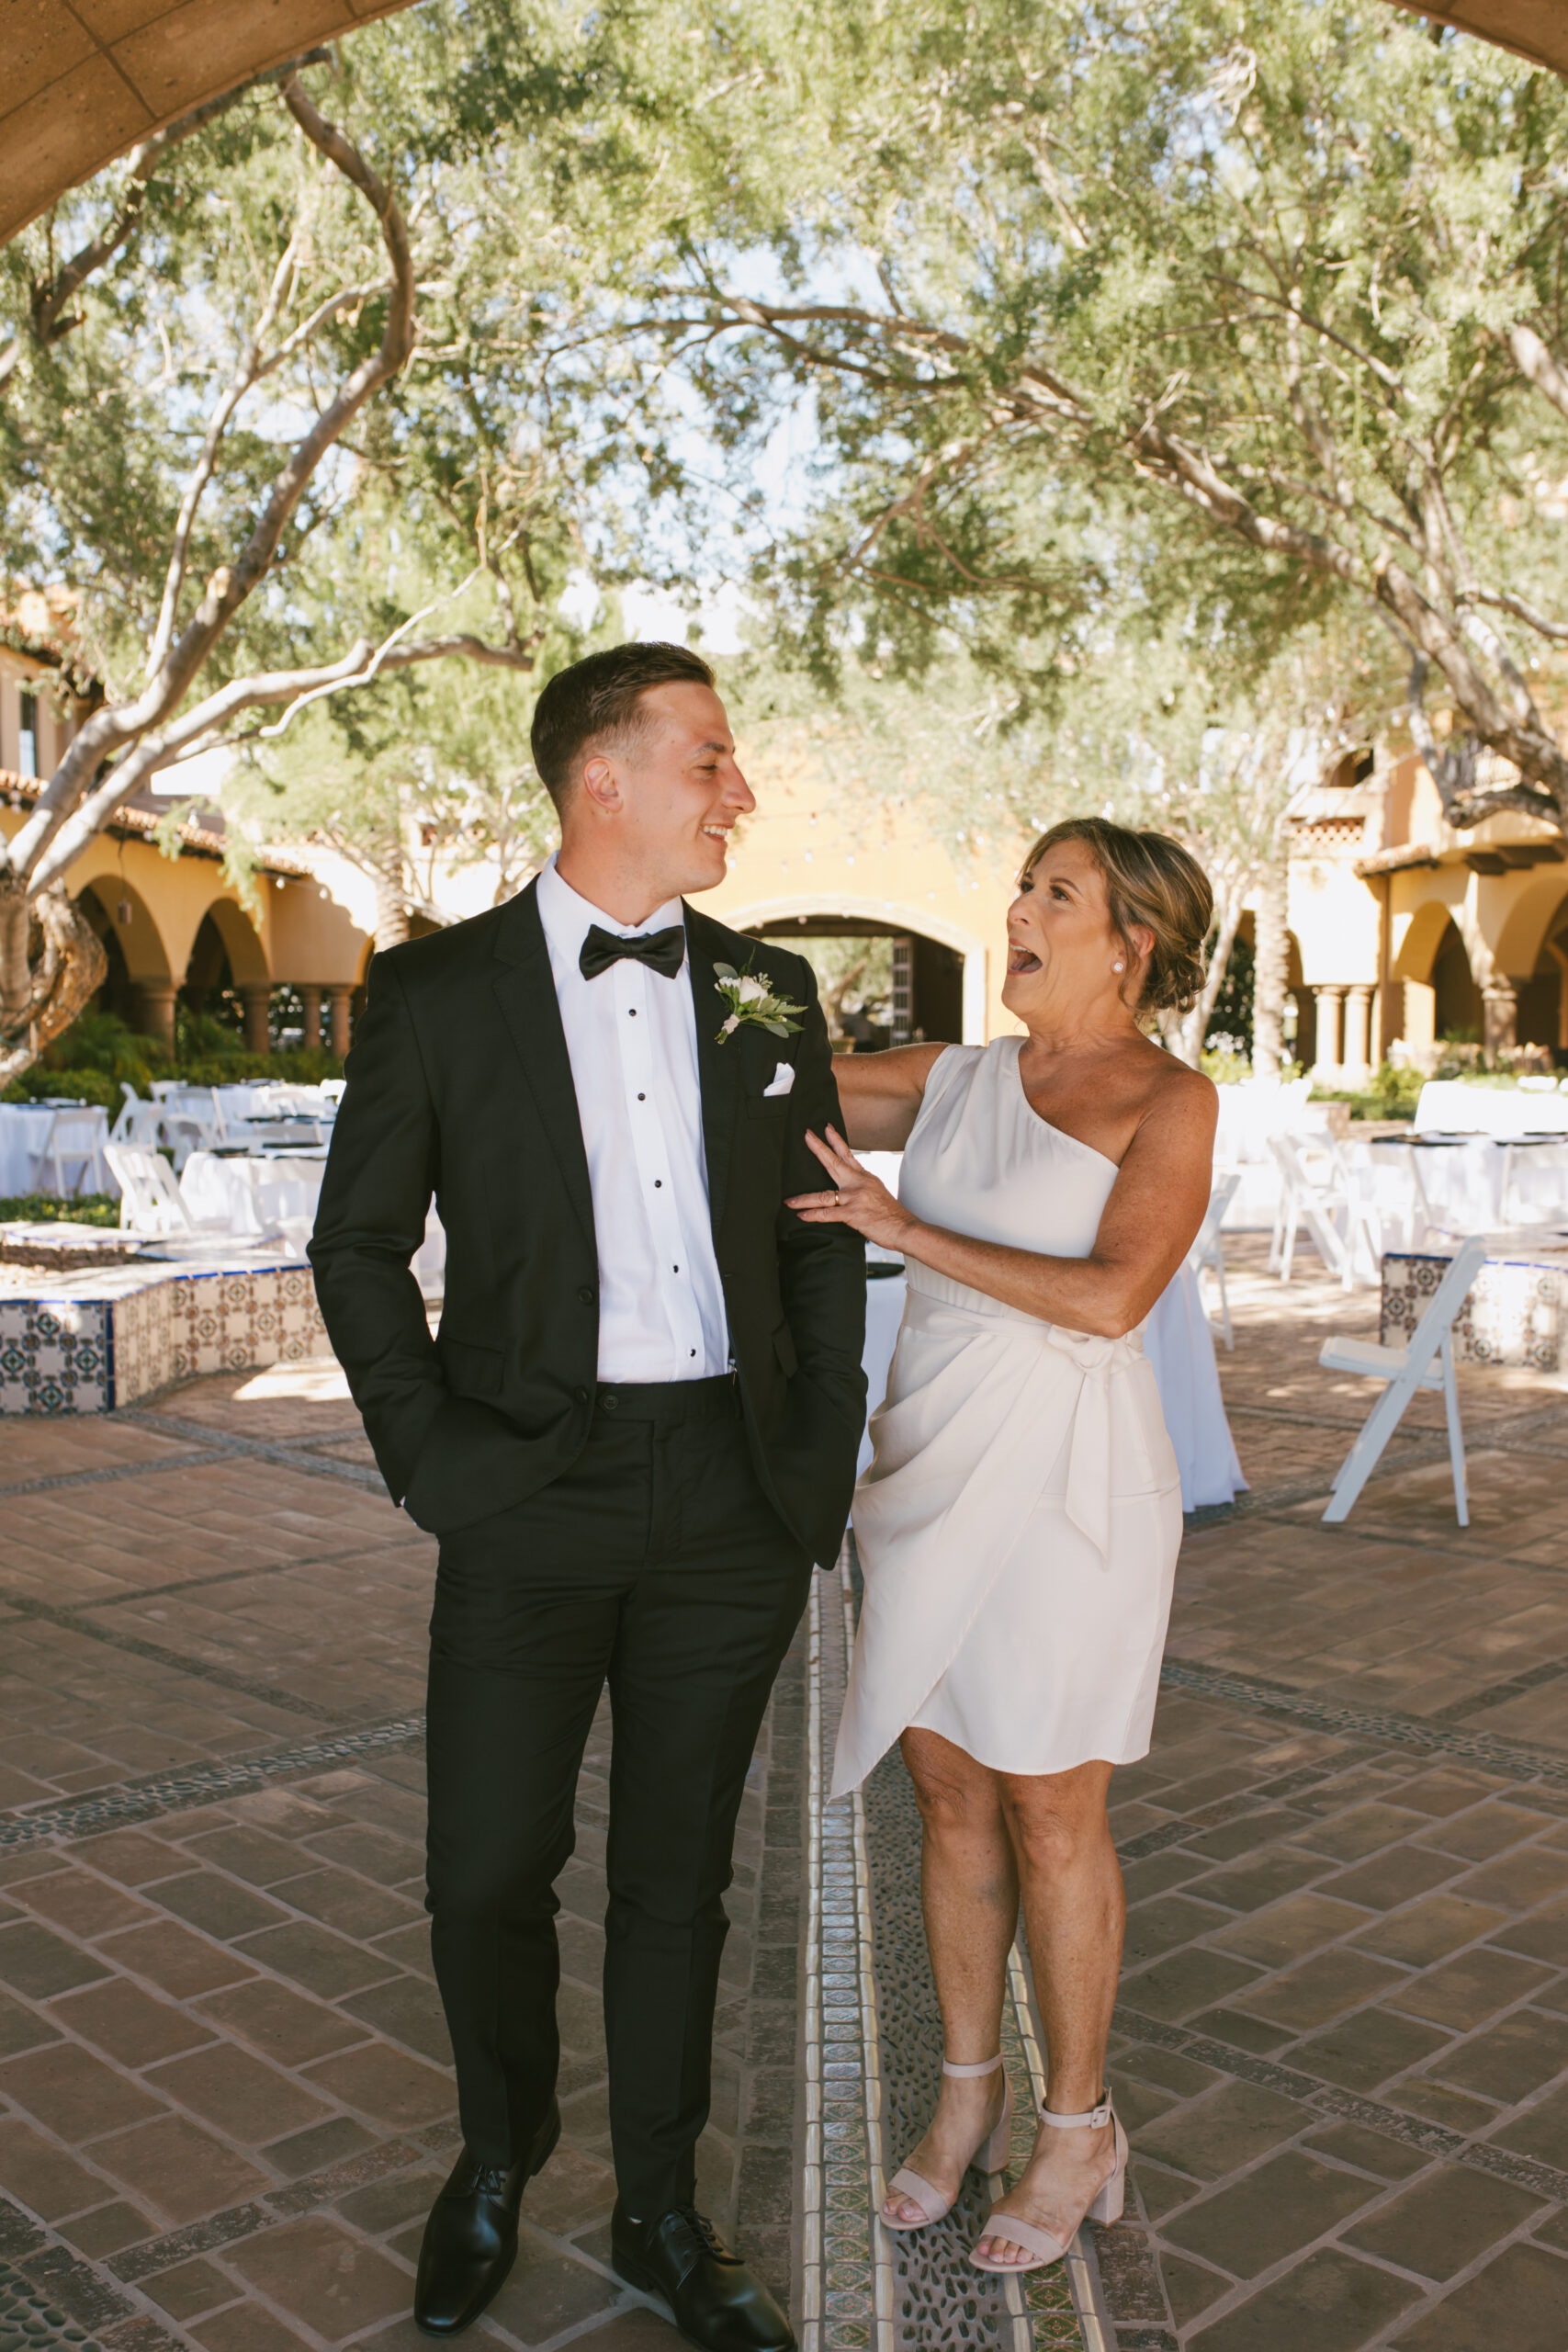 Mother's first look with Groom Max during Romantic wedding photography in Phoenix